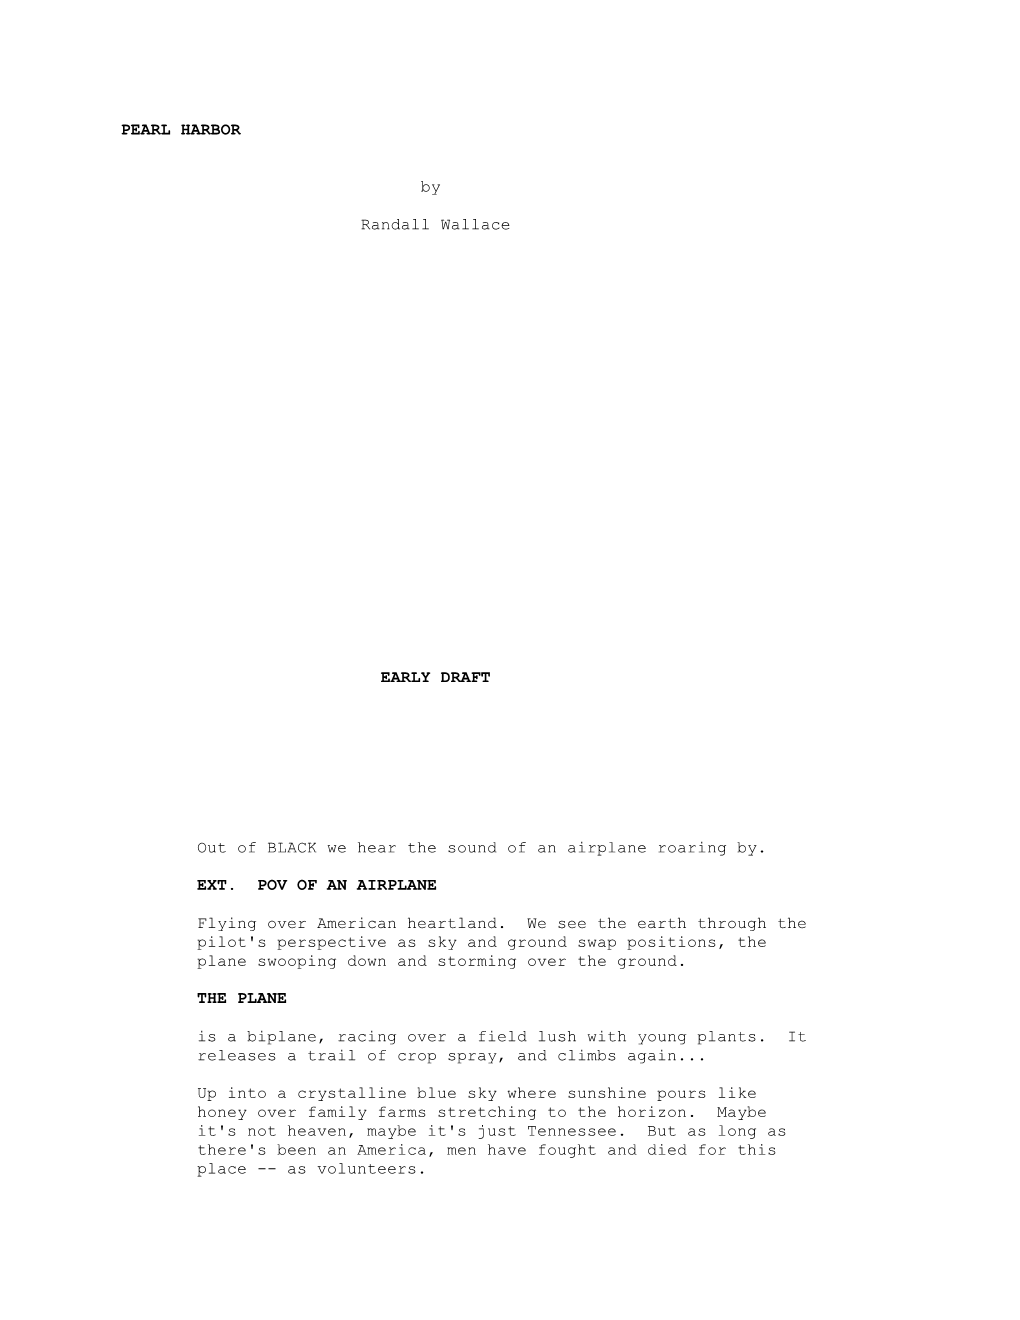 PEARL HARBOR by Randall Wallace EARLY DRAFT out of BLACK We